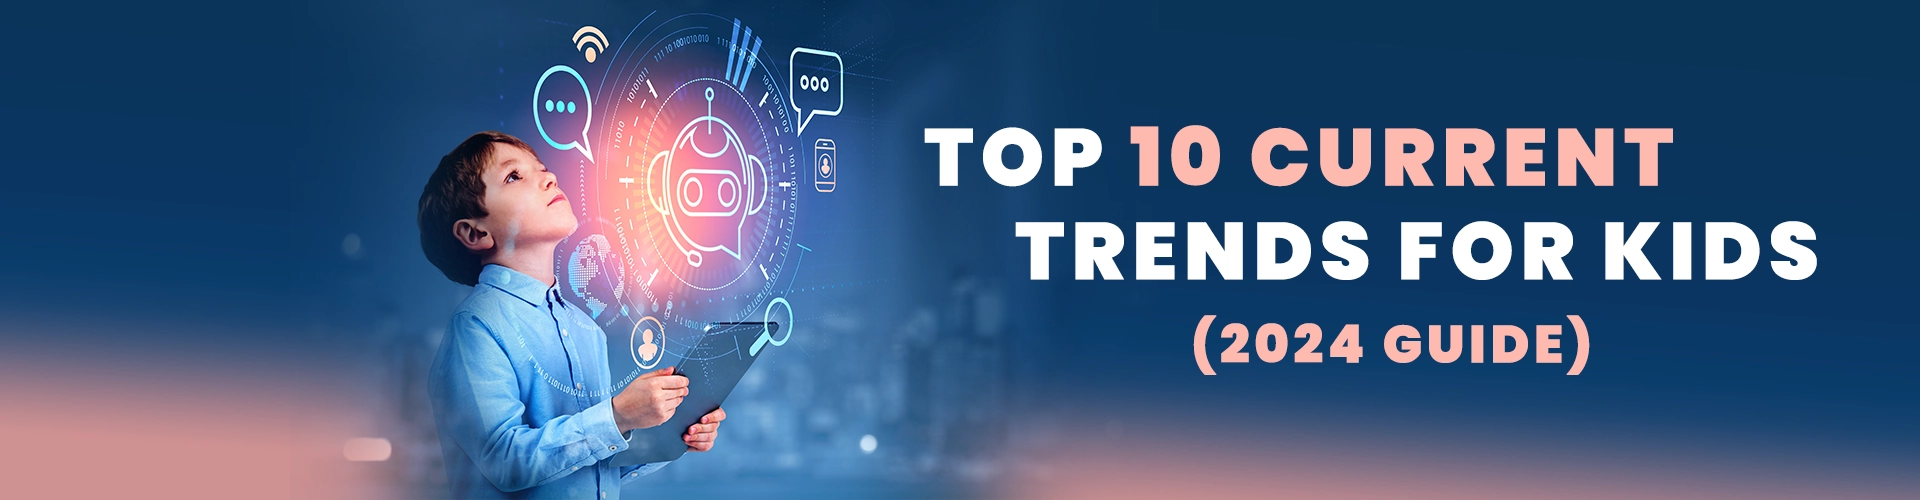 Top 10 current trends for kids